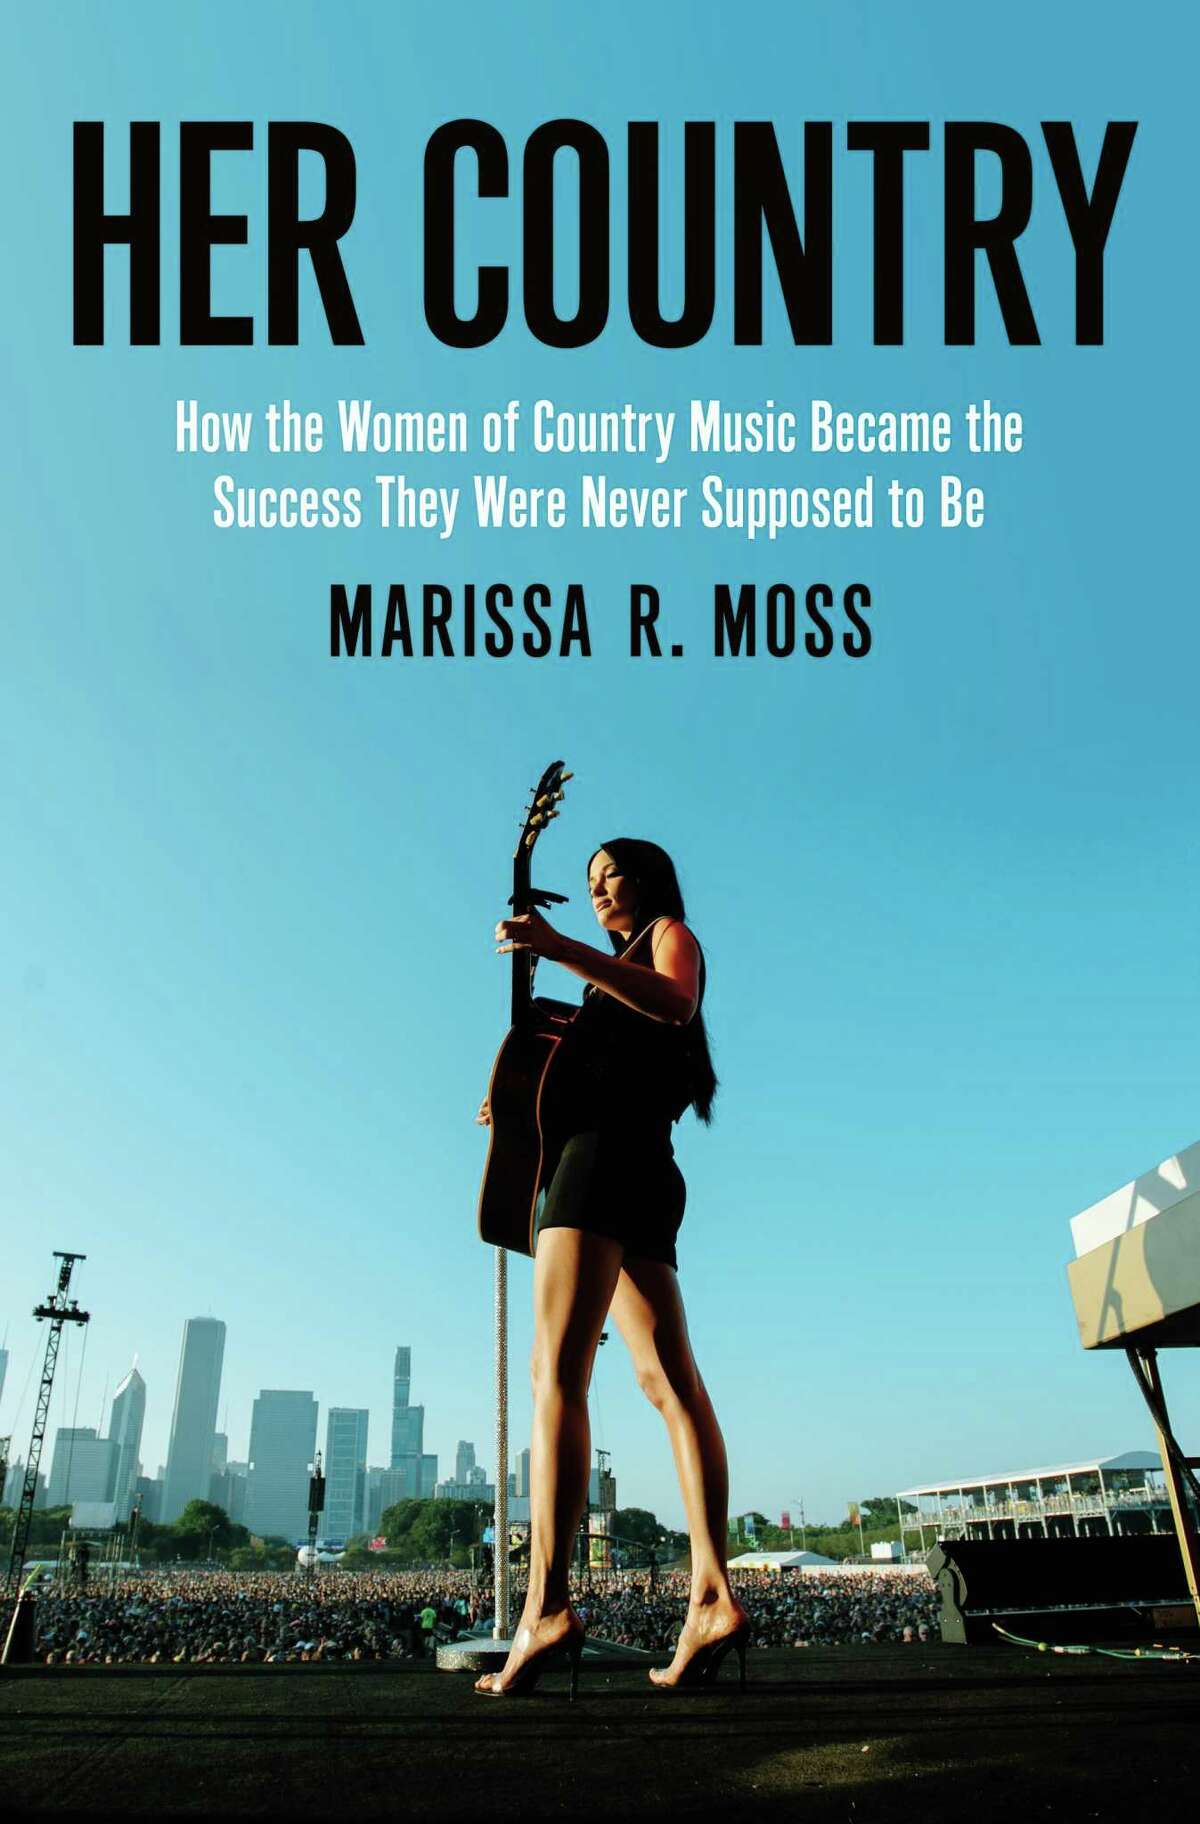 Author Marissa R. Moss' book, 'Her Country'